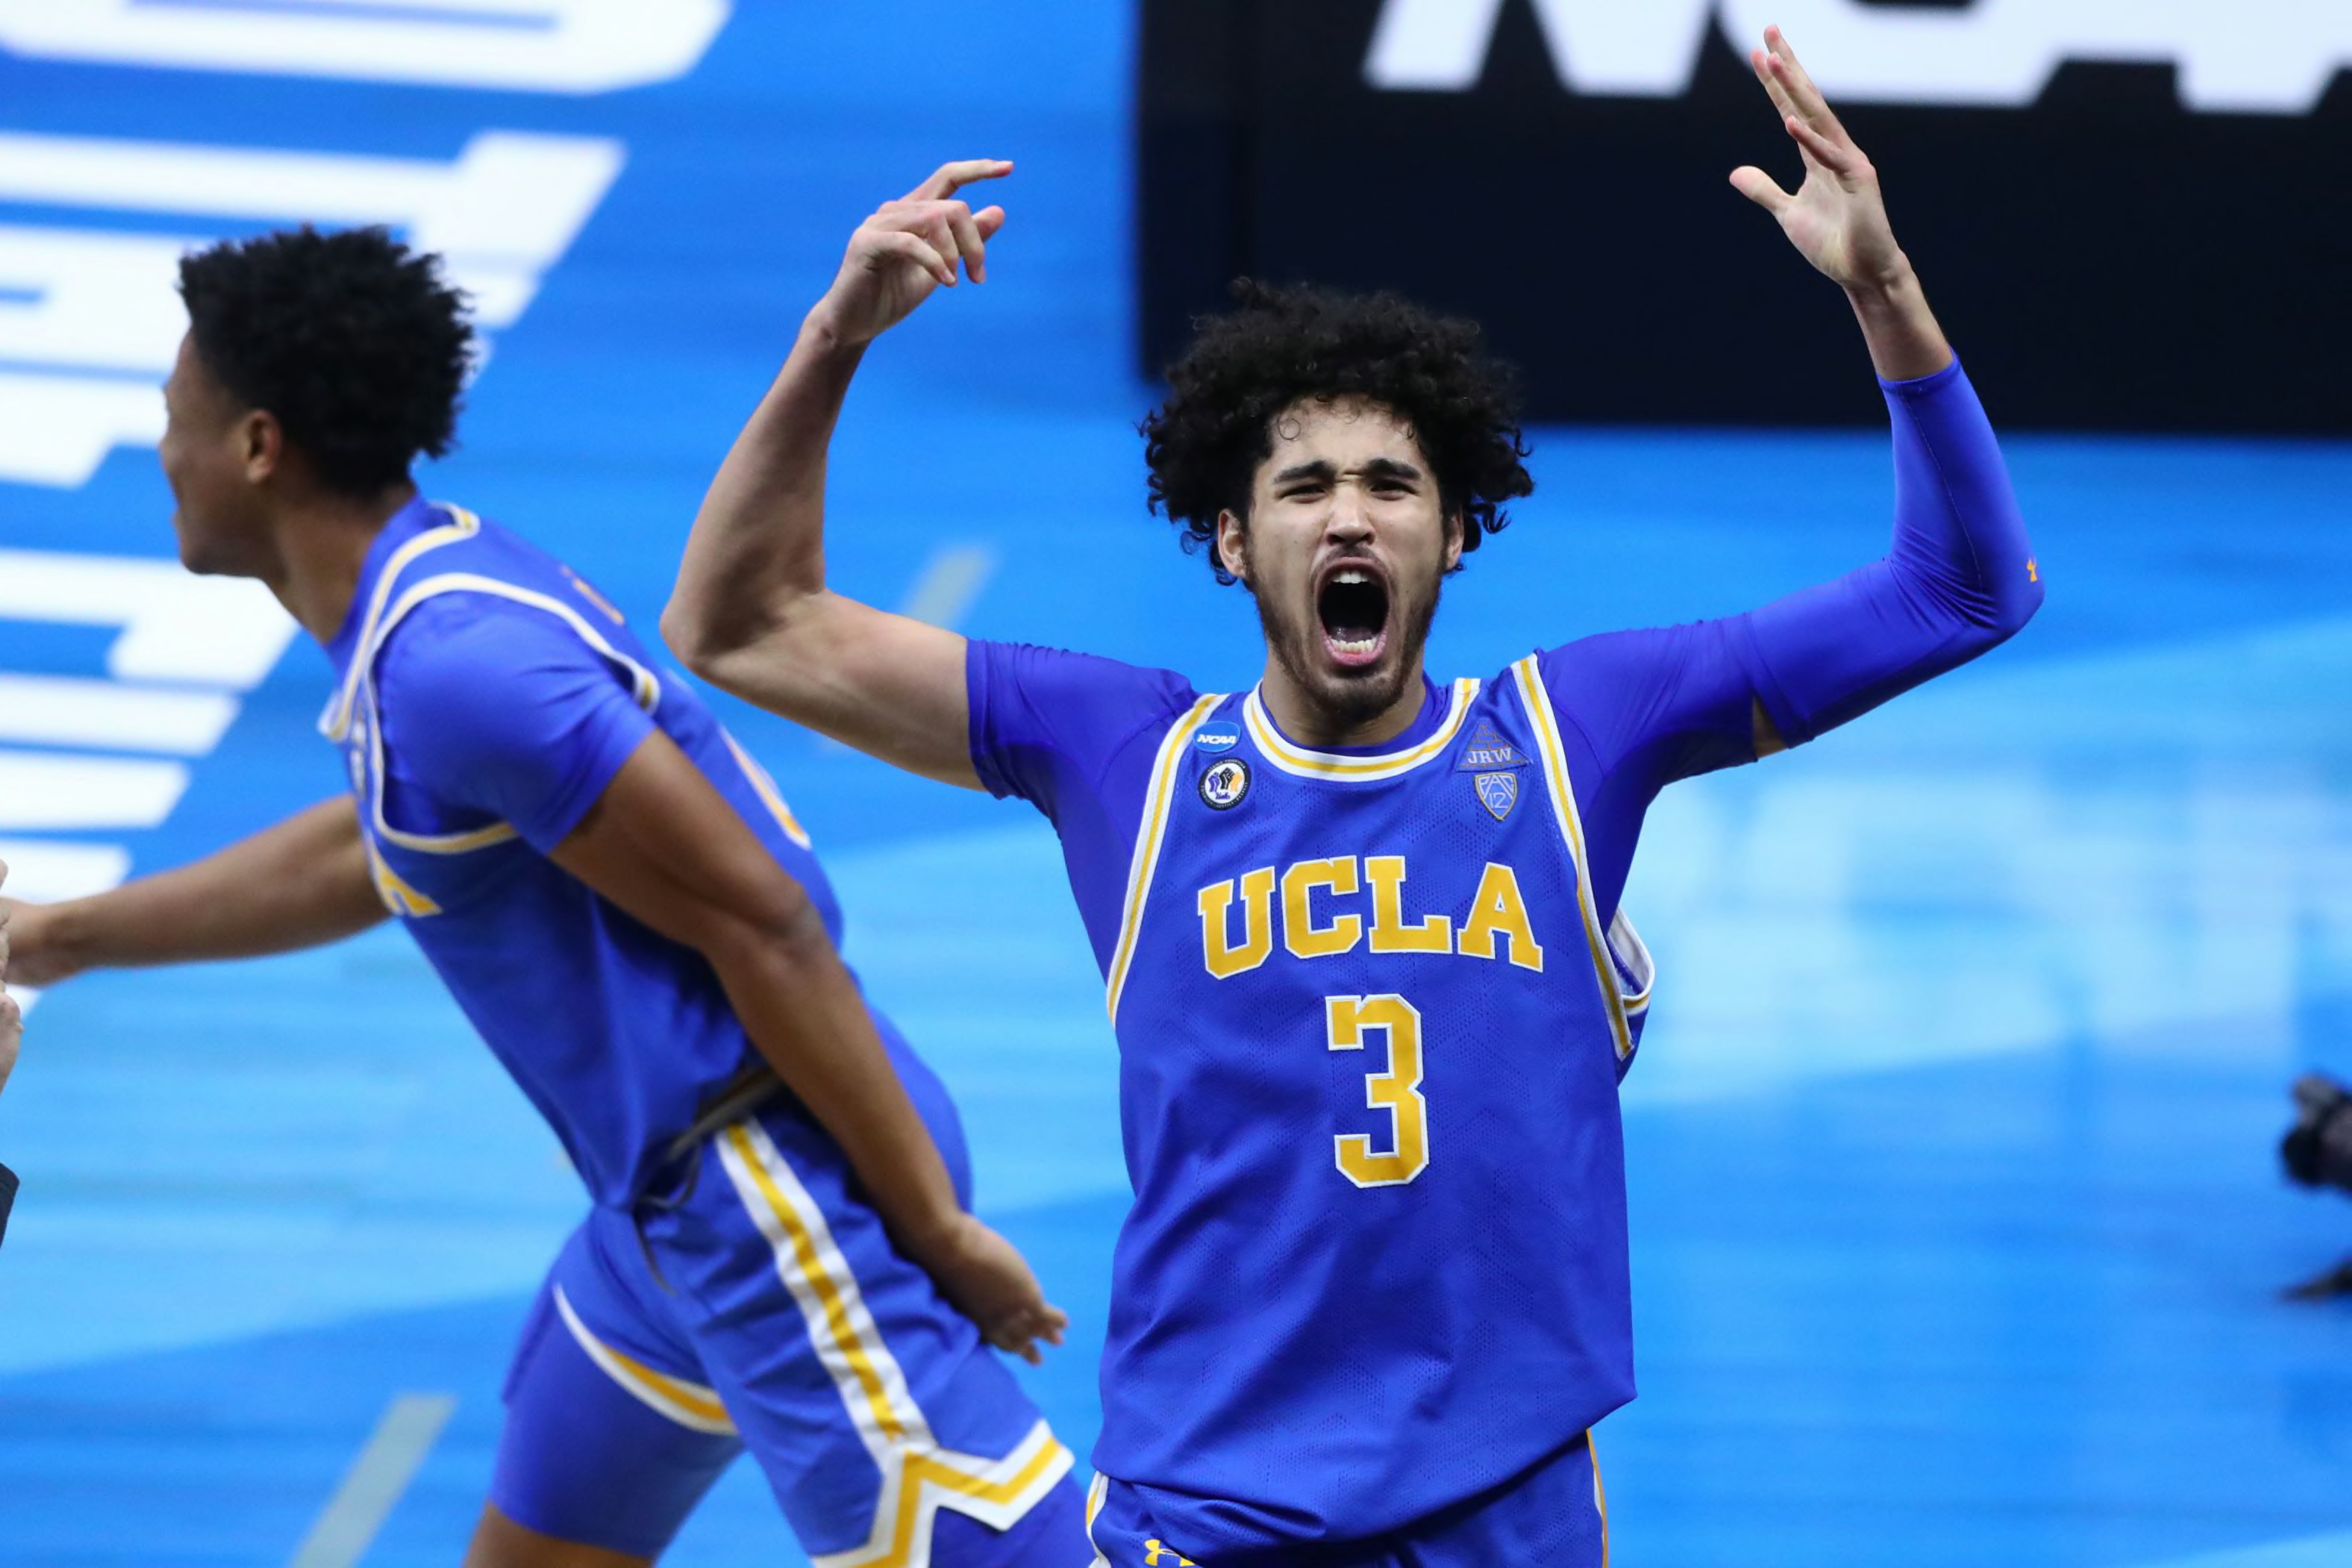 Johnny Juzang's leadership and scoring have propelled UCLA's Final Four run